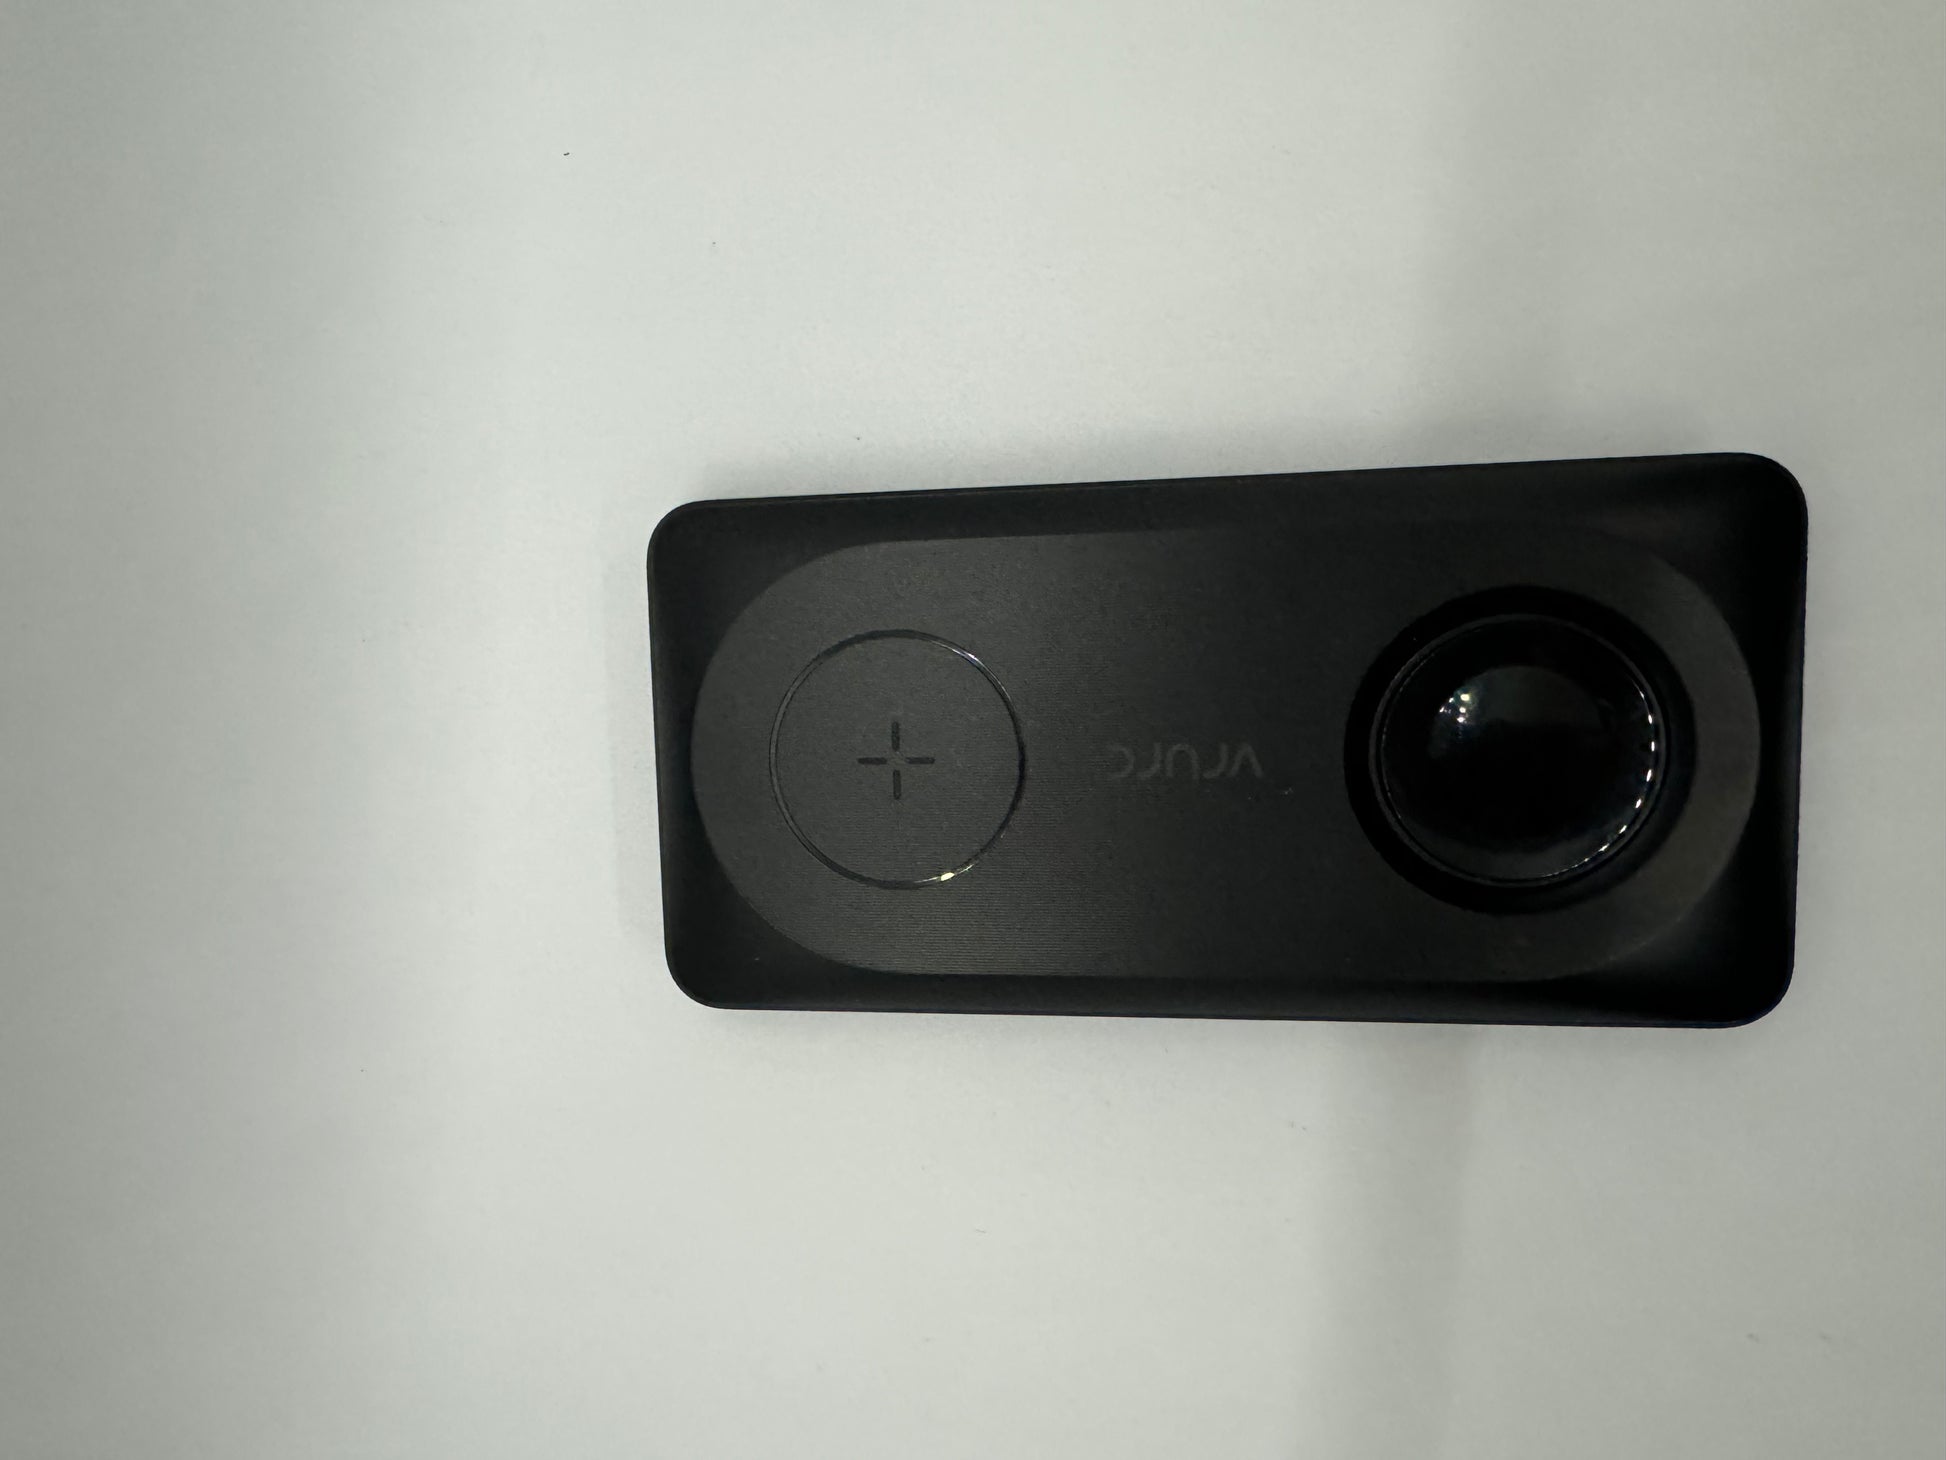 The picture shows a rectangular device that is black in color. On the left side of the device, there is a circular button with a plus sign in the middle. On the right side of the device, there is a round lens or sensor. Below the button, the word "DJI" is written in white letters. The device is placed on a white surface.